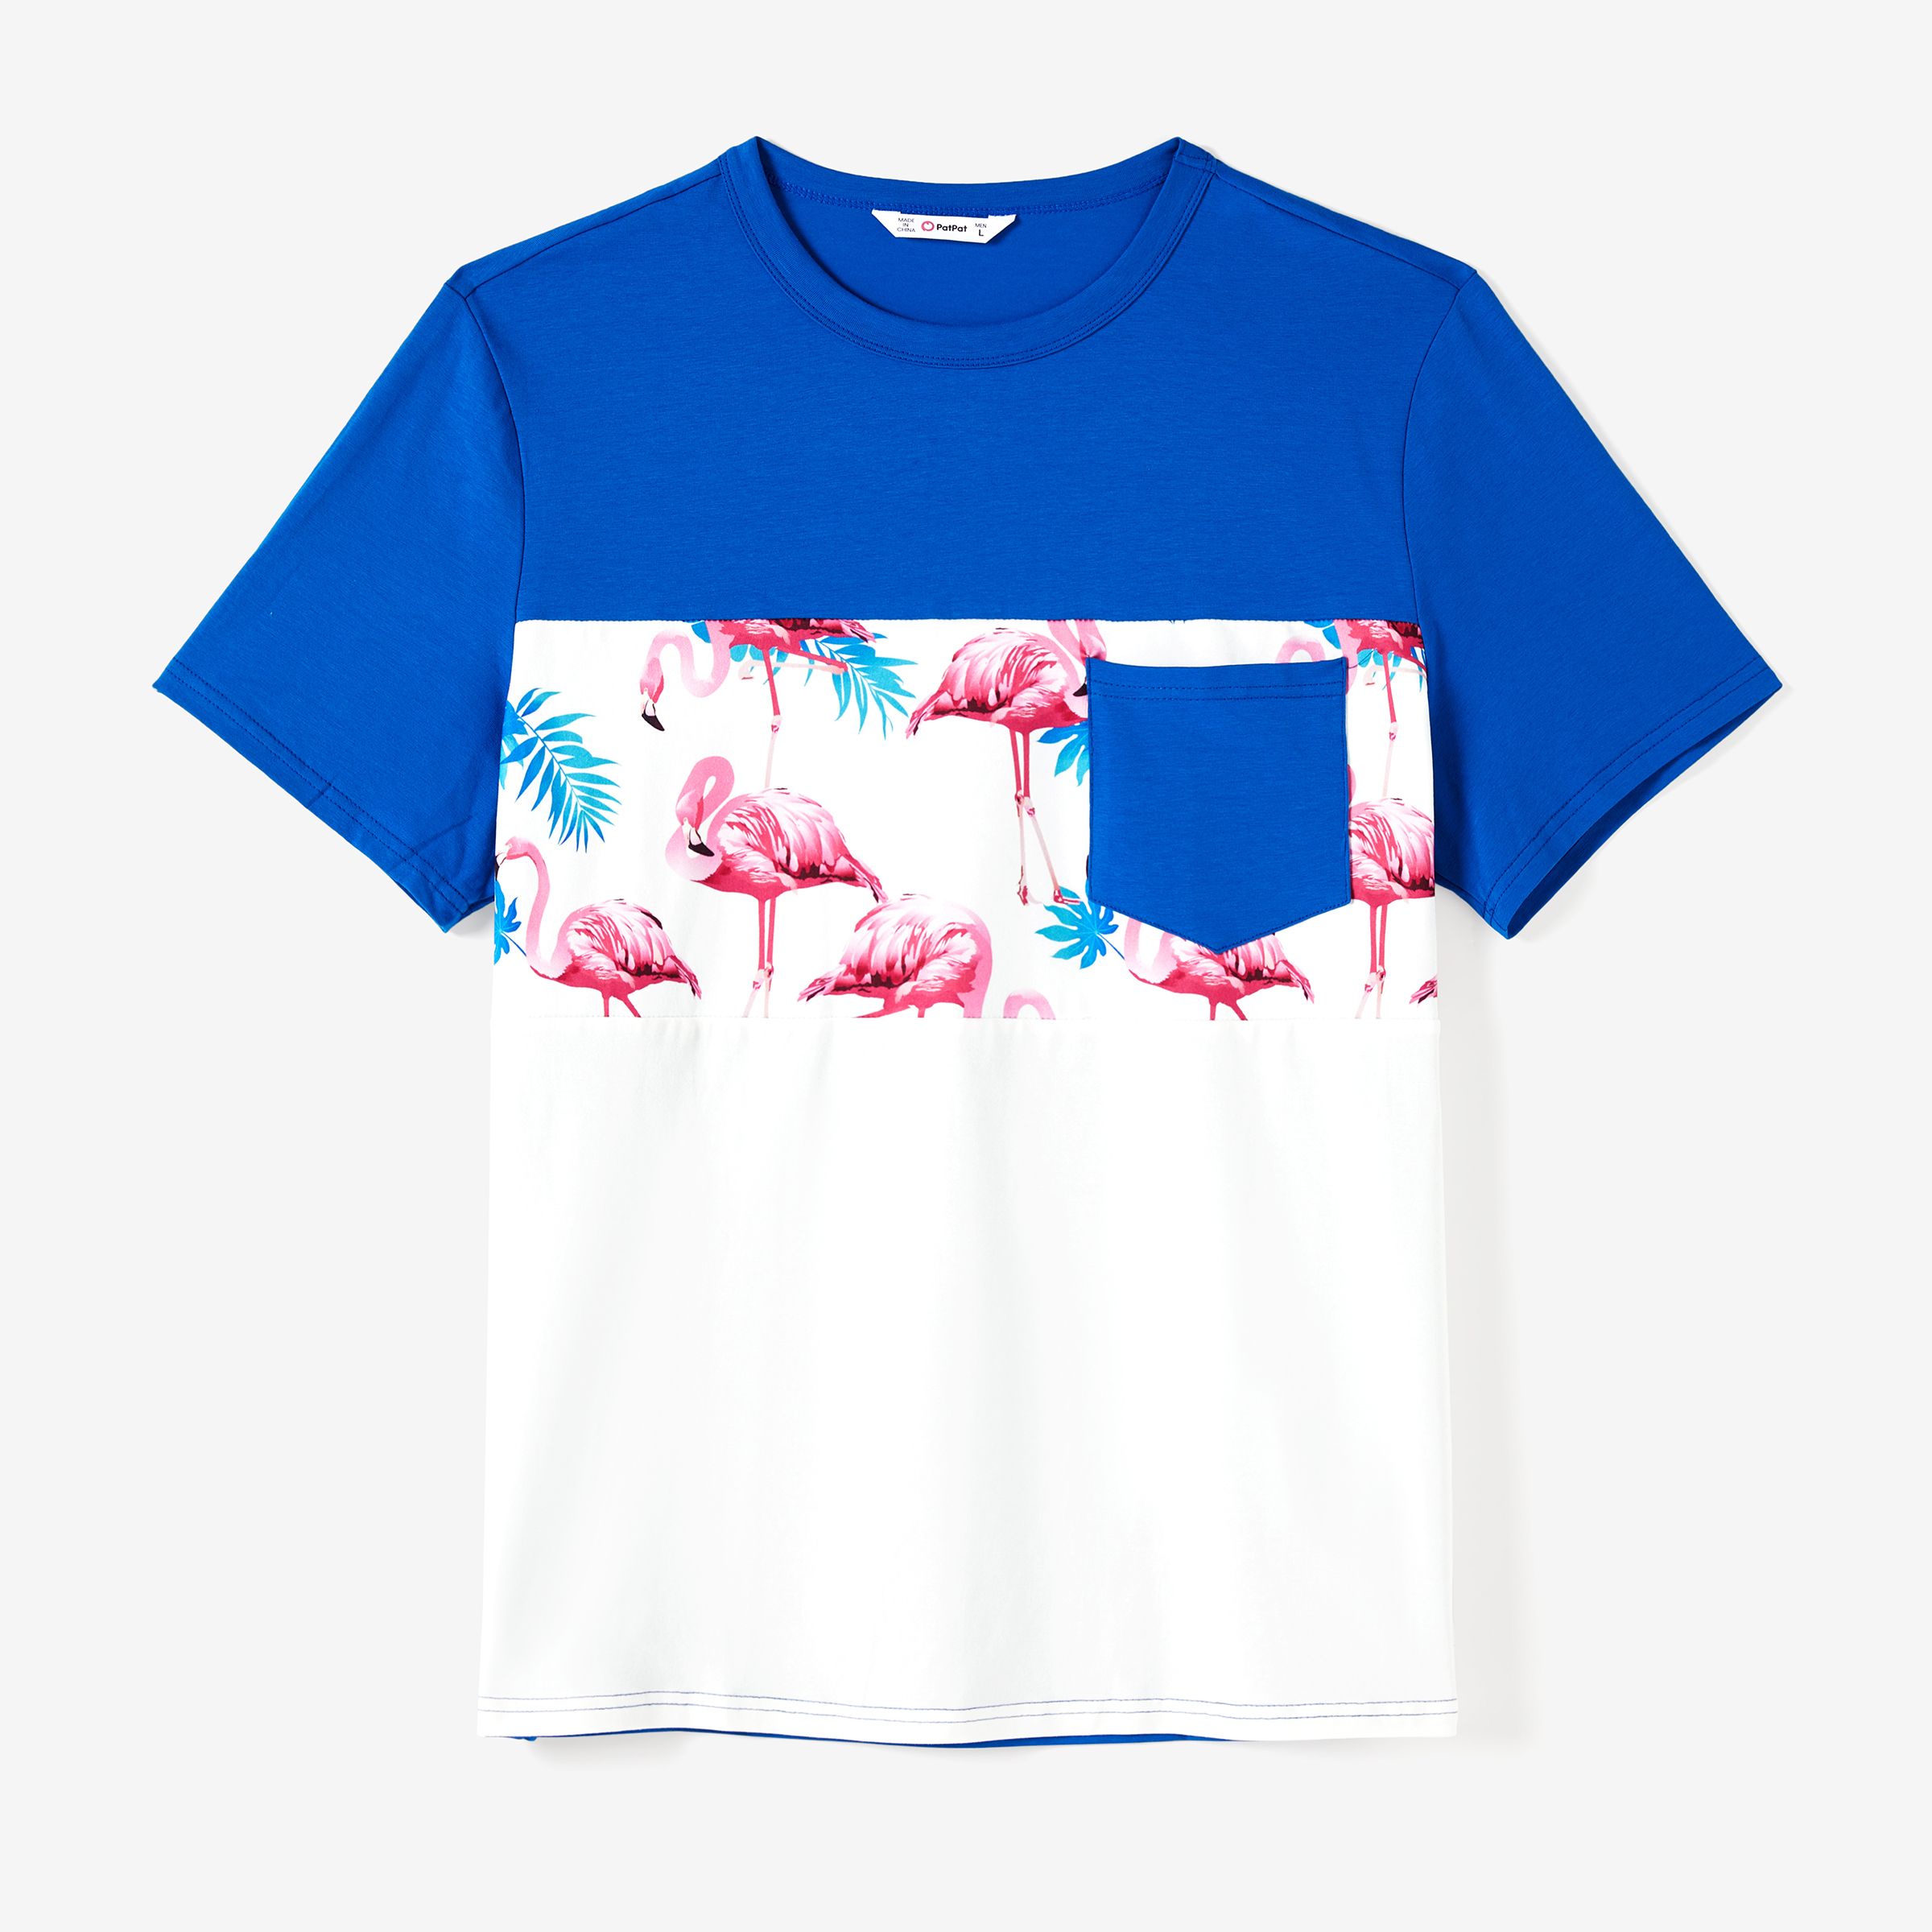 Family Matching Sets Color Block Short-Sleeve Tee and Flamingo Print Ruched Strap Drawstring Sides S